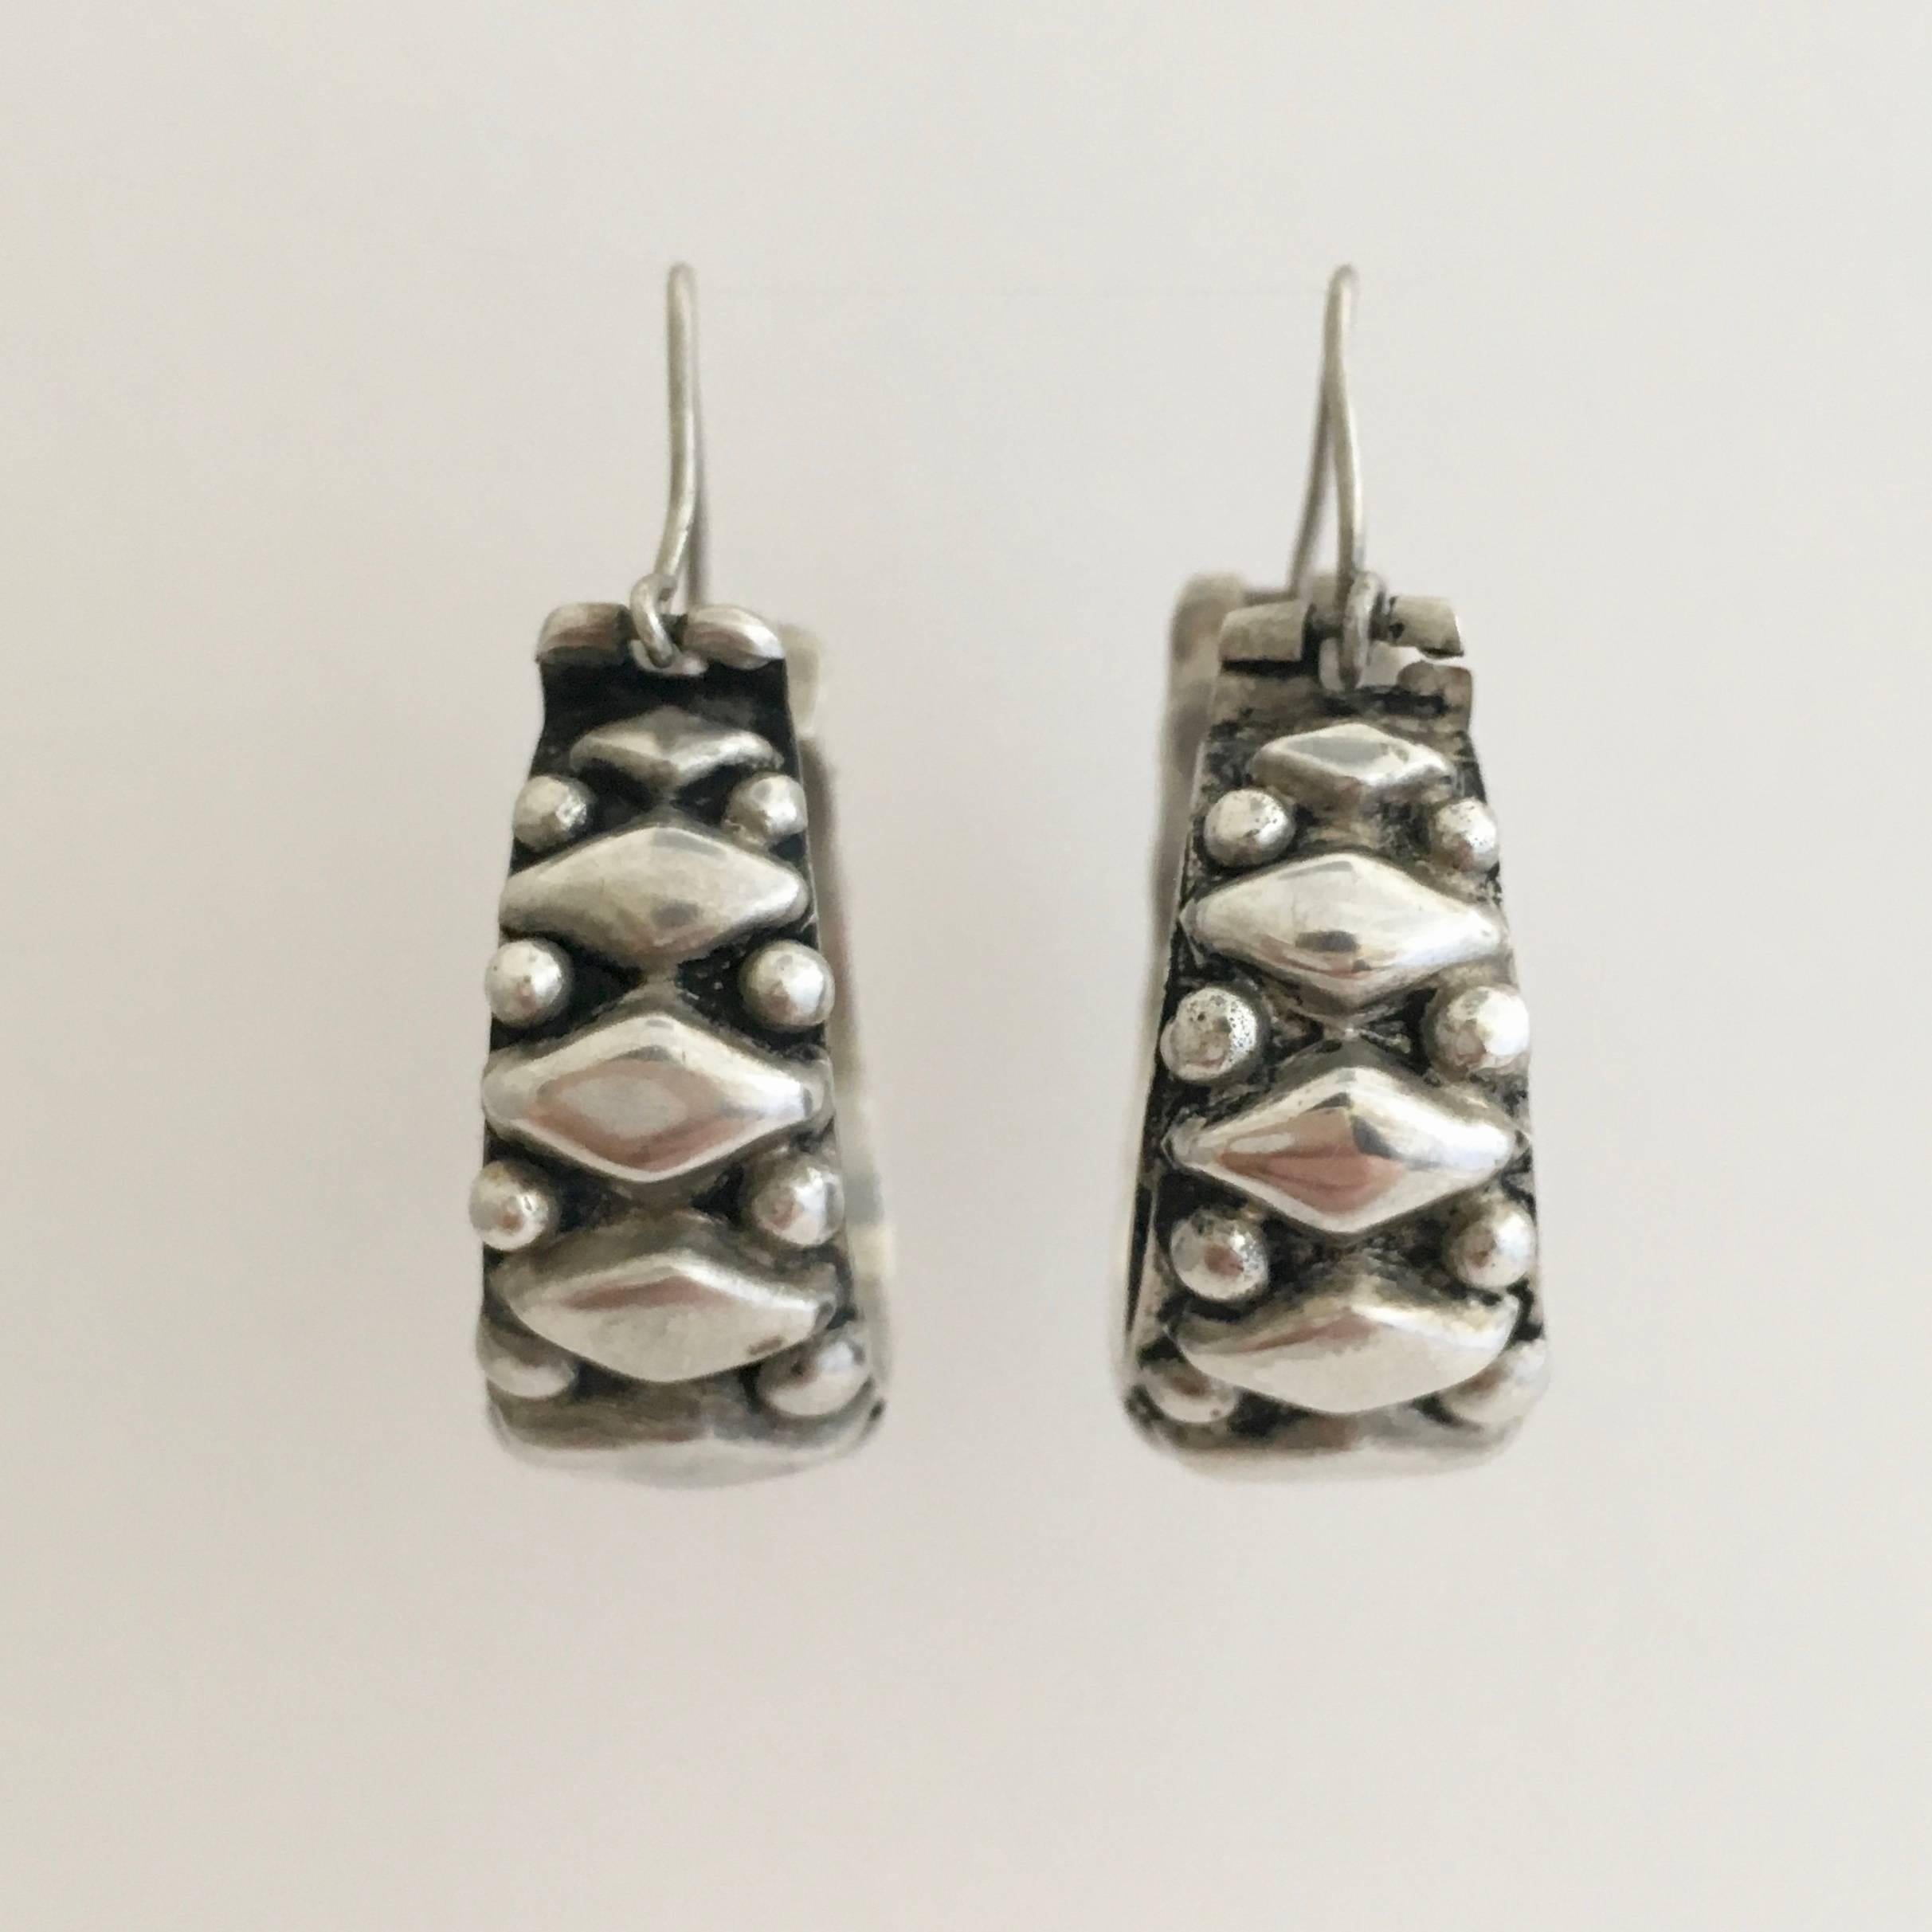 A fantastic pair of chunky silver hoops with an authentic folk feel. Earrings like these never go out of fashion. They are a generous, yet wearable size at 4cm high with a diameter of 3cm. Each earring is stamped with 925. 
